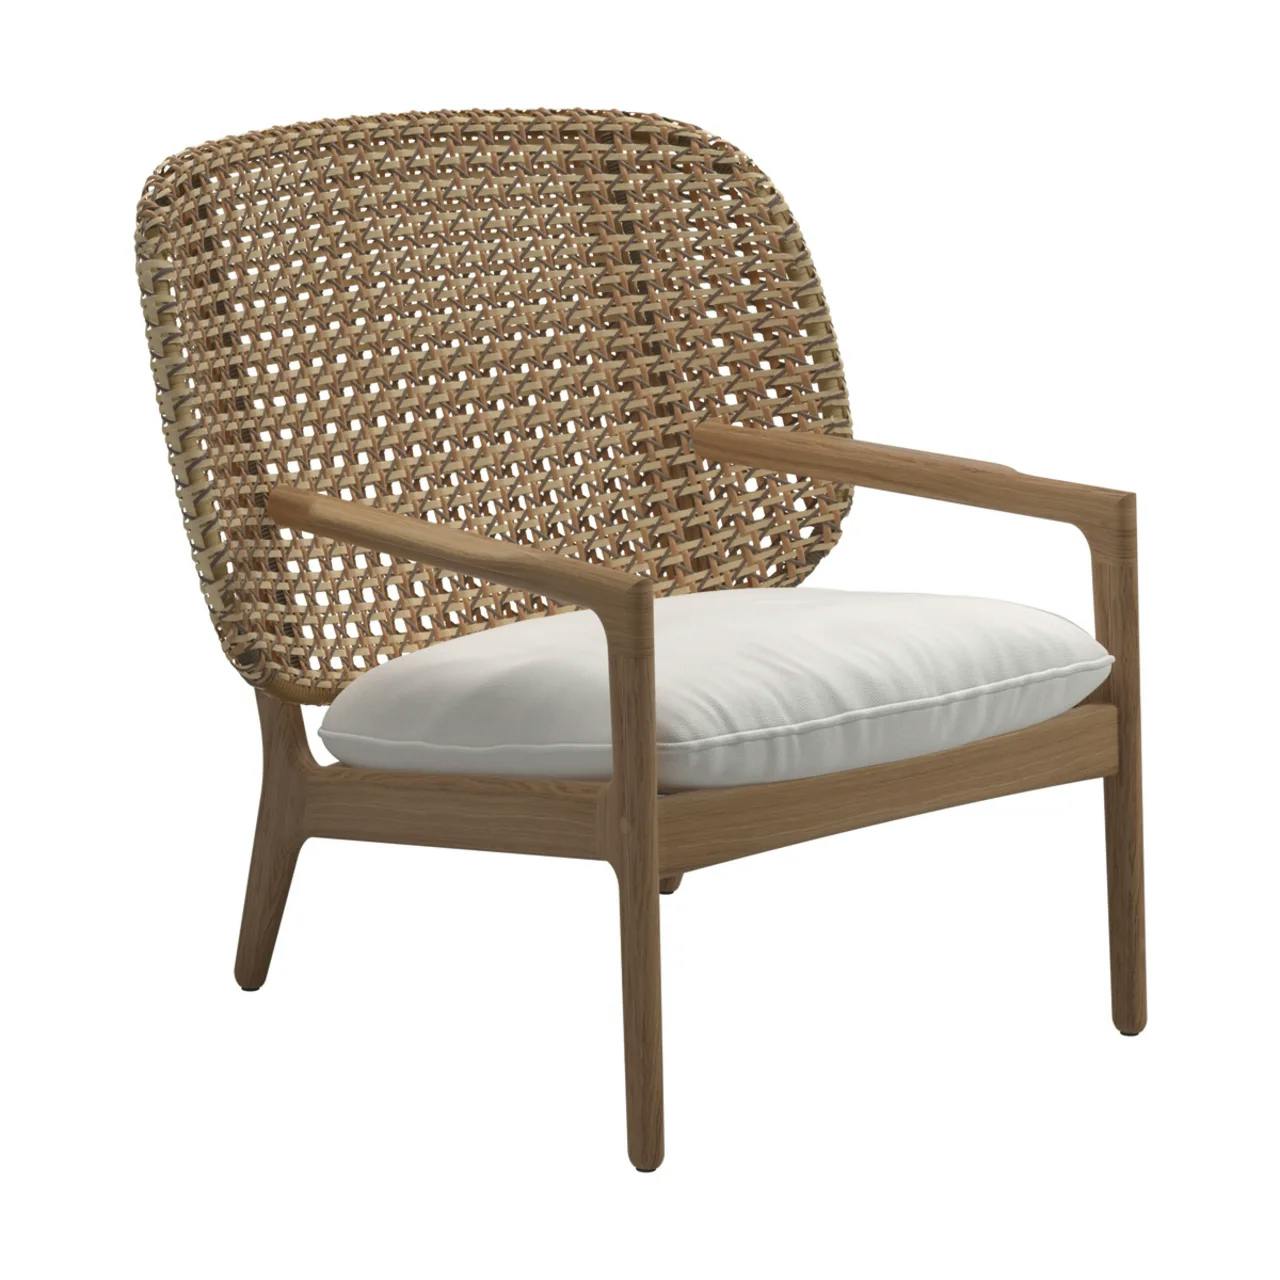 Kay Low Back Lounge Chair | Harvest Wicker Back Panel & Lopi Marble Seat Cushion Fabric